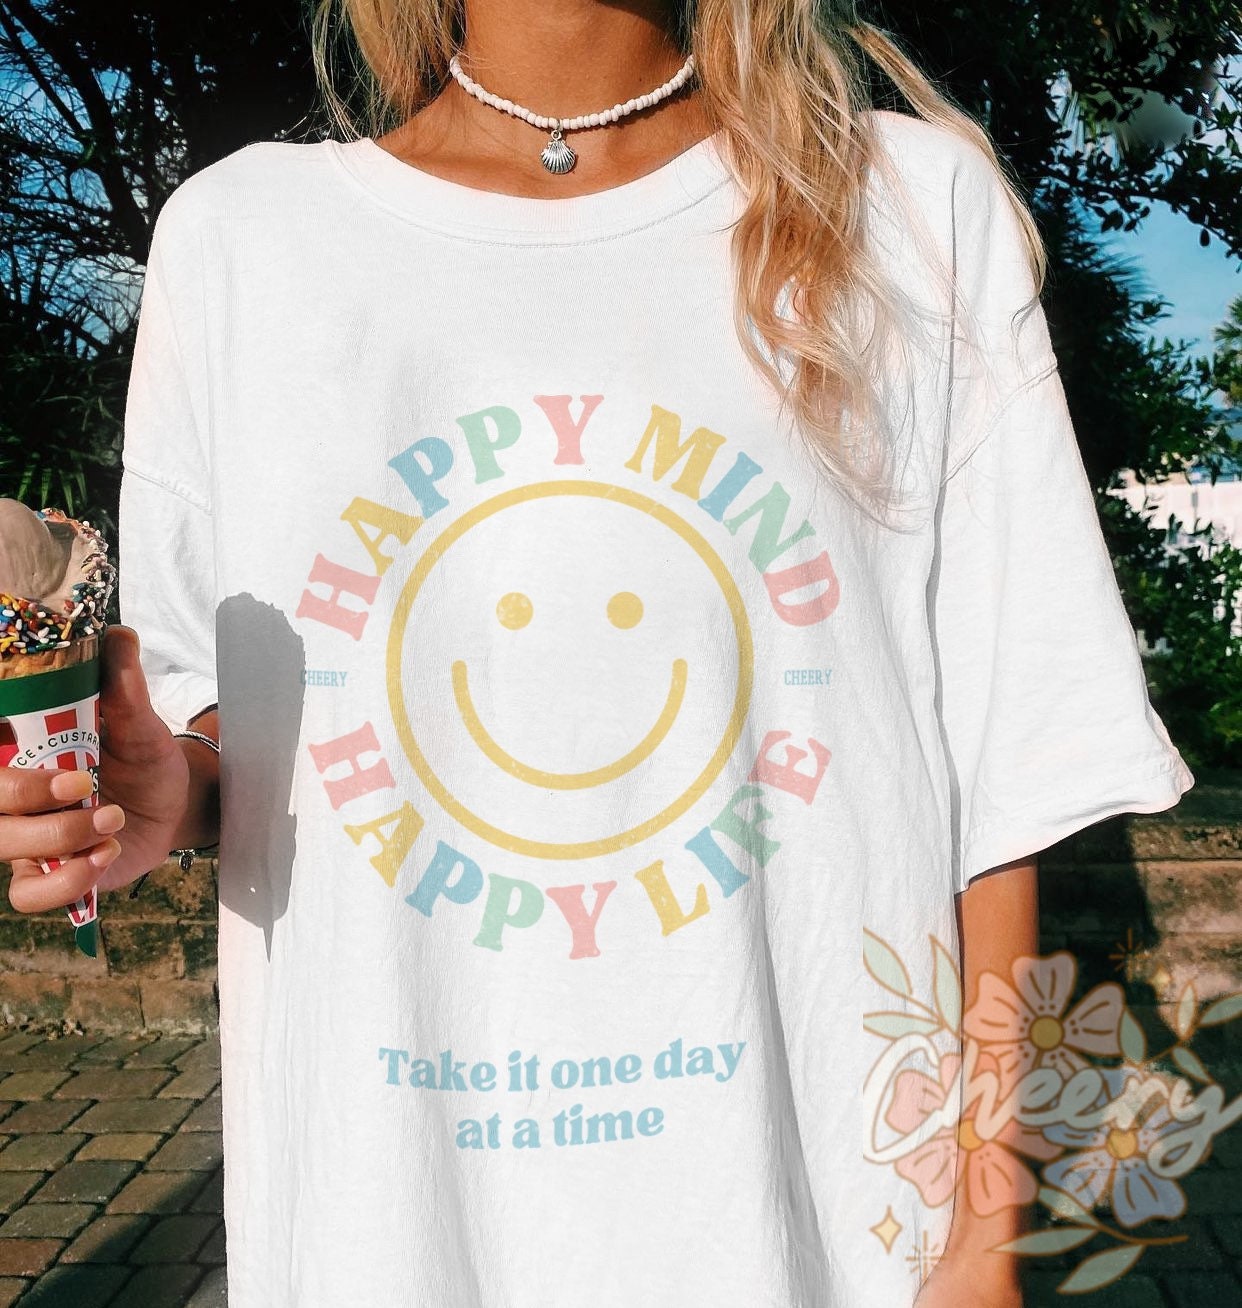 Klage violinist Opgive Tshirt Happy Mind Happy Mind Aesthetic T Shirt Graphic Tee - Etsy